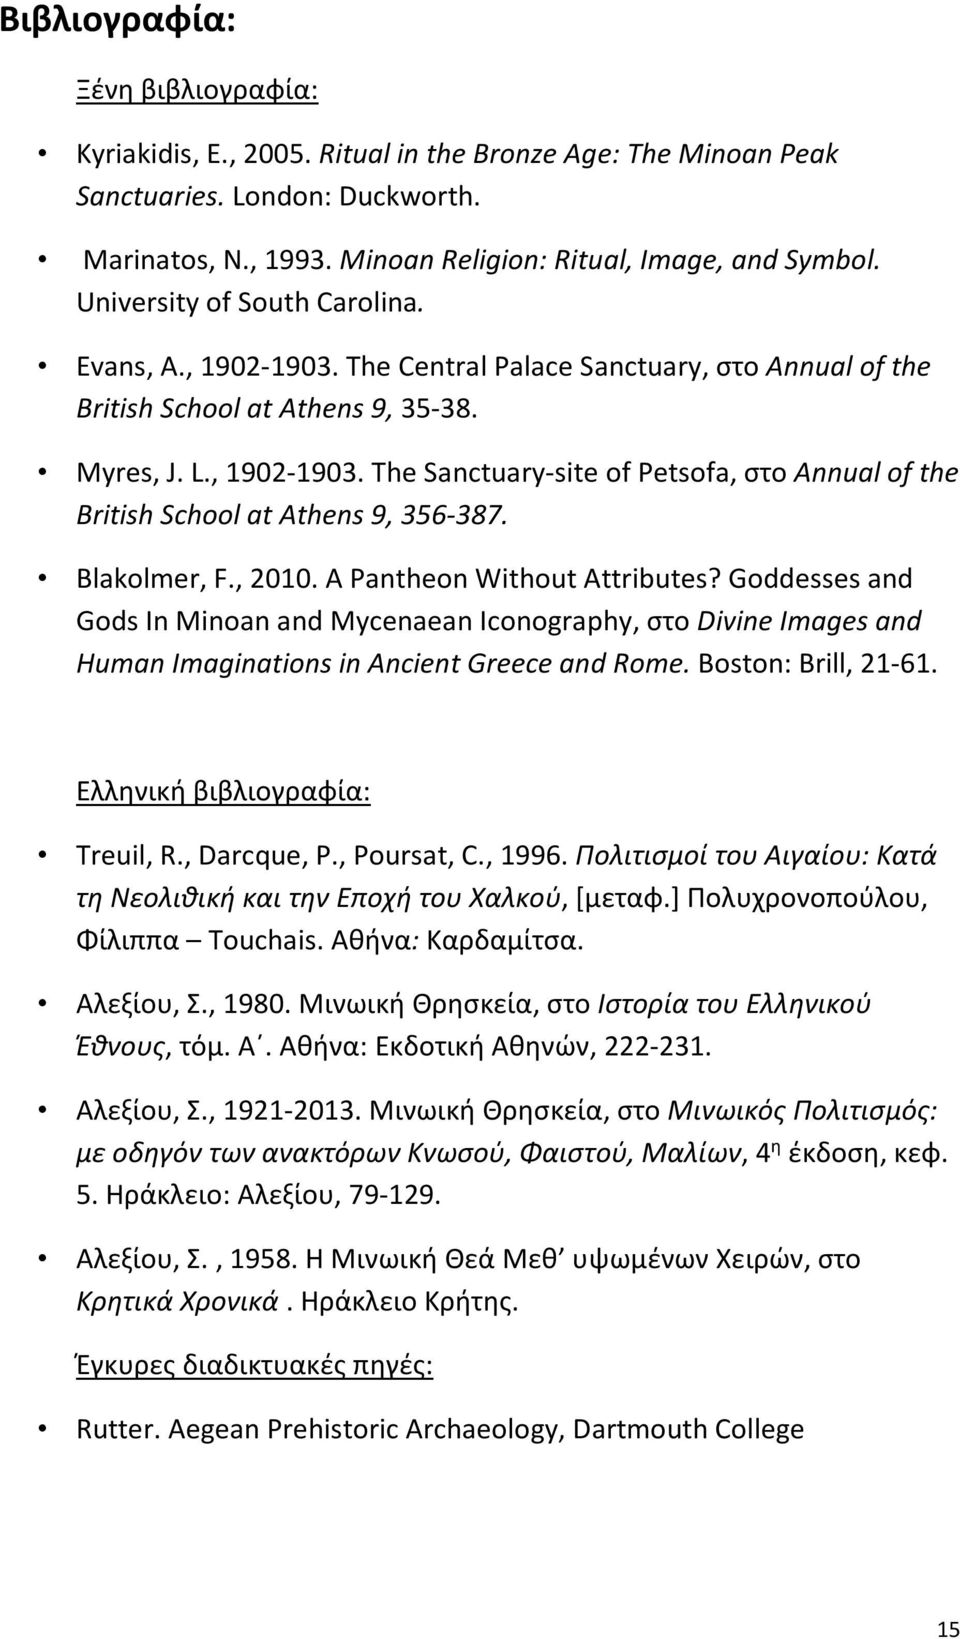 Blakolmer, F., 2010. A Pantheon Without Attributes? Goddesses and Gods In Minoan and Mycenaean Iconography, στο Divine Images and Human Imaginations in Ancient Greece and Rome. Boston: Brill, 21-61.